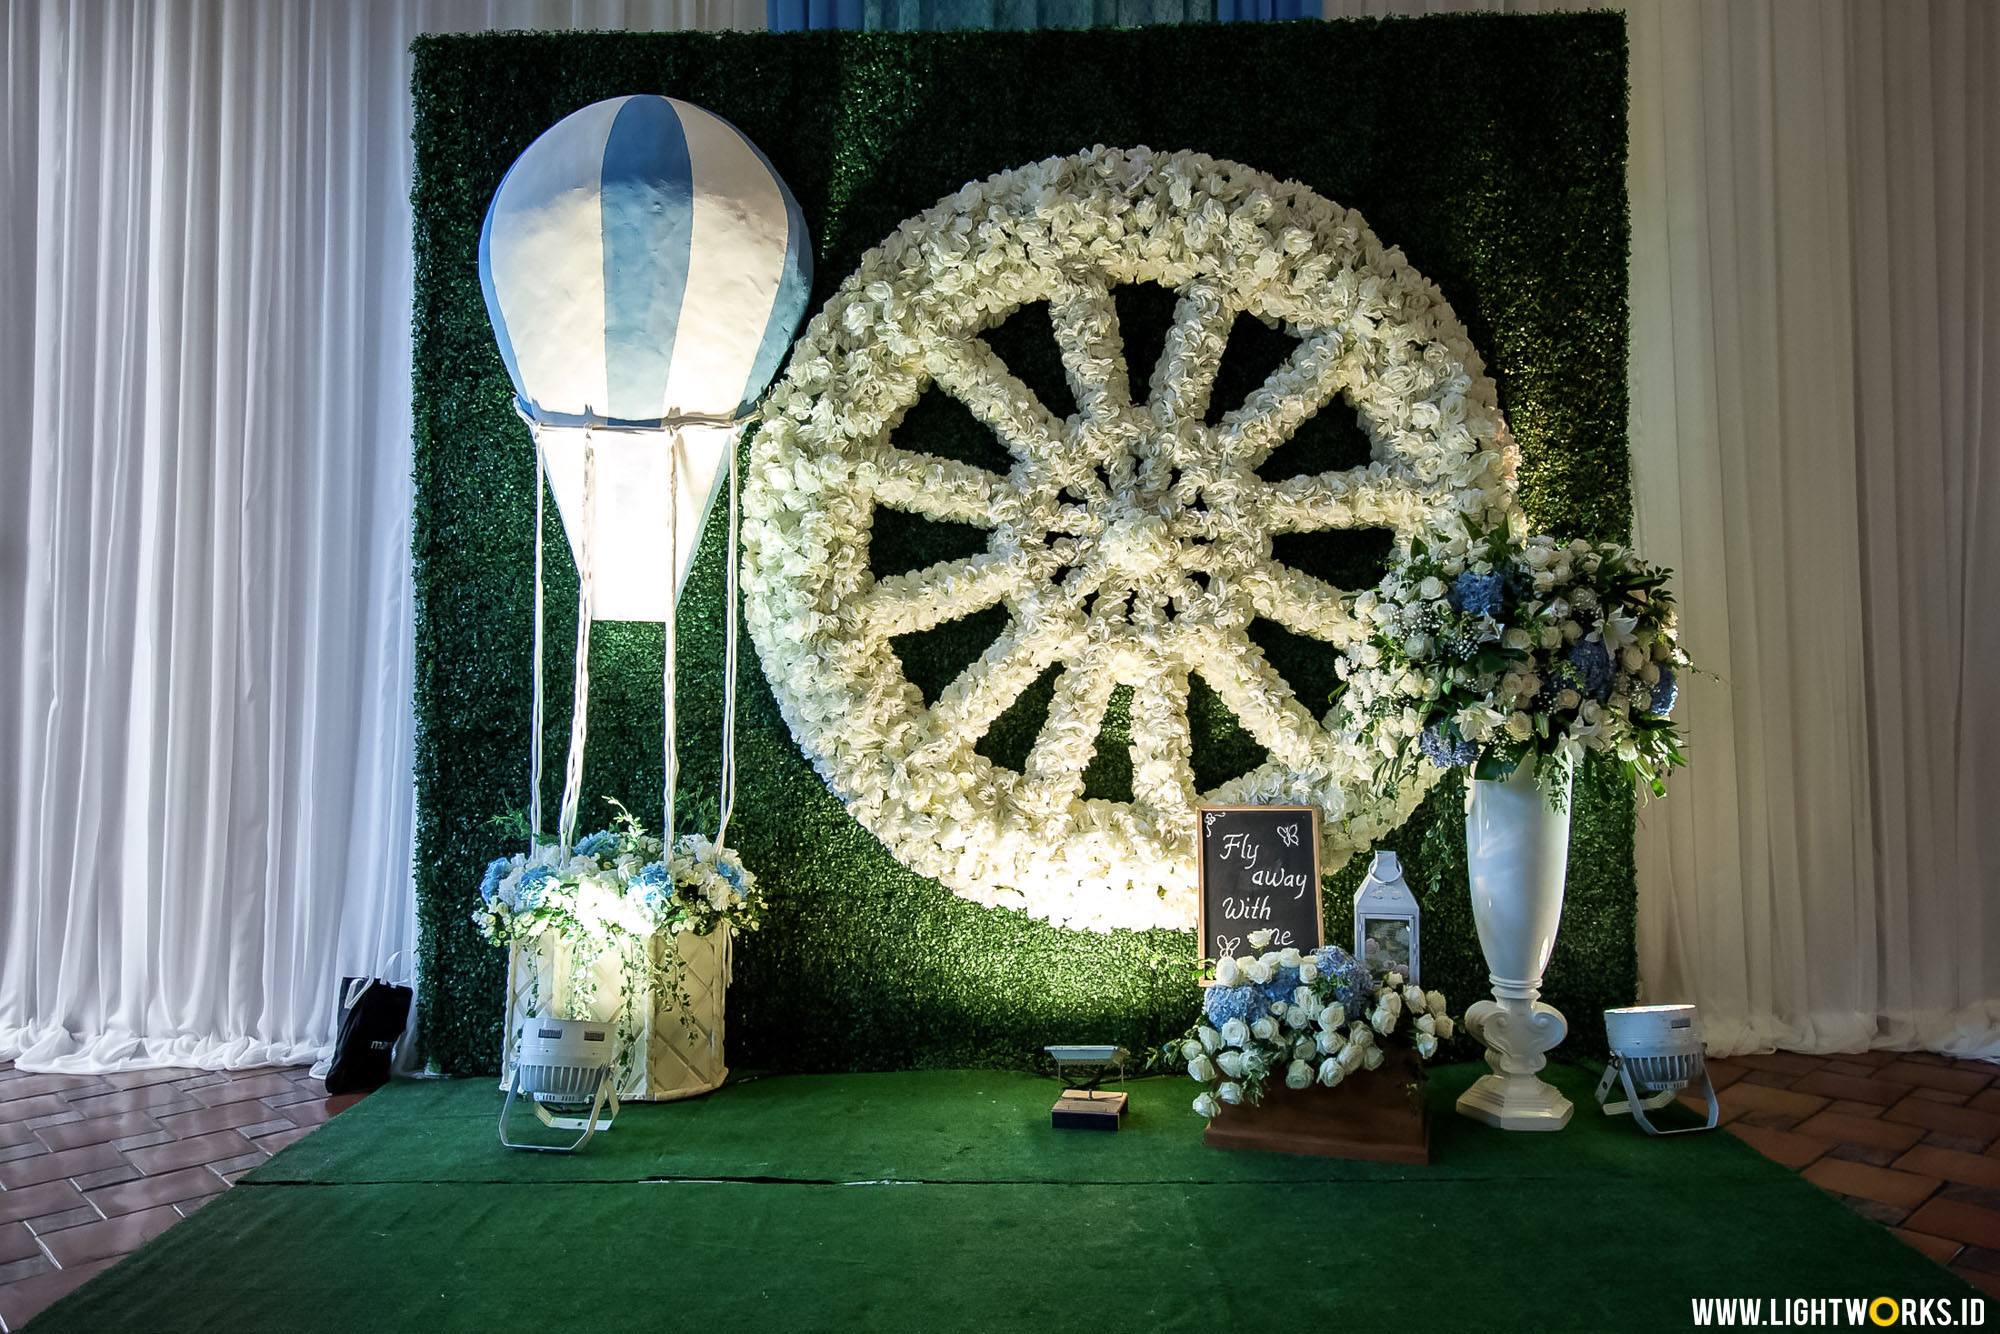 The wedding of Nikko and Fania | Venue at Sampoerna Strategic Square | Decoration by Grasida Decor | Organised by Kreativ Things | Gown by Fetty Rusli | MUA by Adi Adrian | Catering by Akasya Catering & Co. | Cake by LeNovelle Cake | Entertainment by Kana Entertainment | Florist by Lily Florist & Decoration and Grasida Decor | Photobooth by Moments To Go | Invitation by Honey Cards | Souvenier by Red Ribbon Gift | Lighting designer by Epafras Septian | Lighting coordinator by Meyliana Tan | Lighting by Lightworks